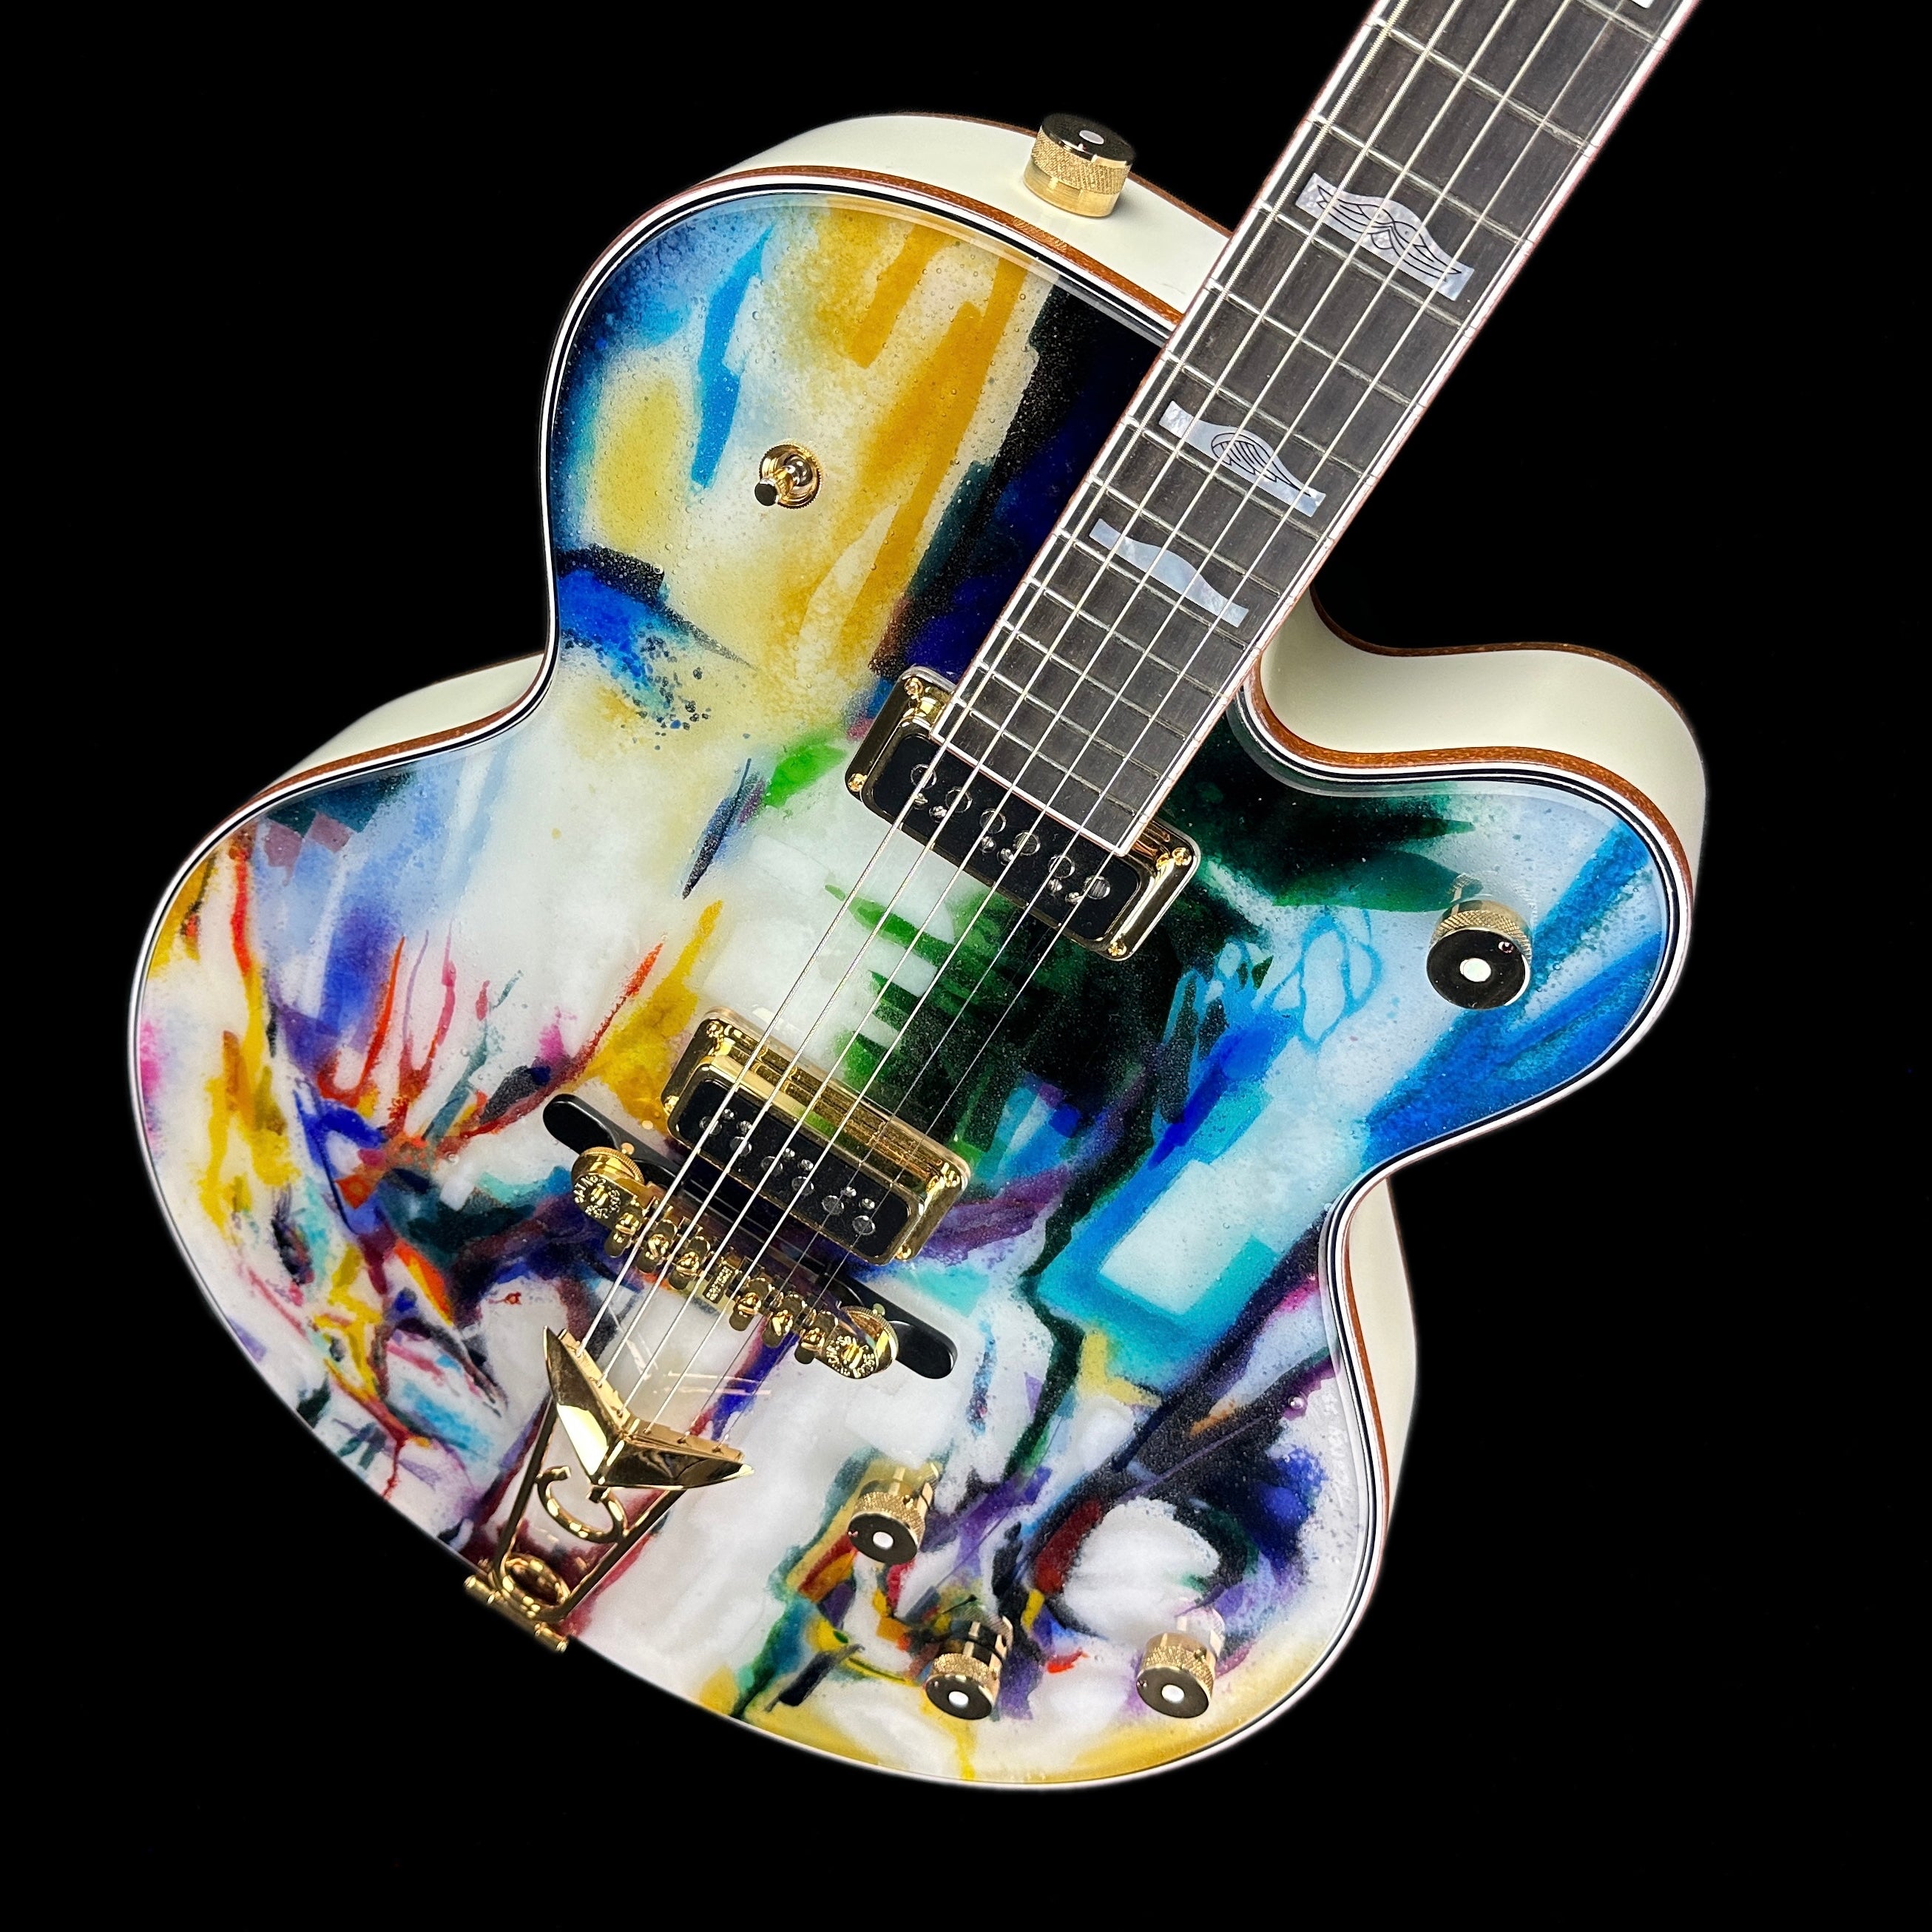 Gretsch Custom Shop G6136-55 Fused Glass White Falcon NOS Masterbuilt By  Stephen Stern White w/ Custom ILluminated Fused Glass Top By Tim Carey (One  